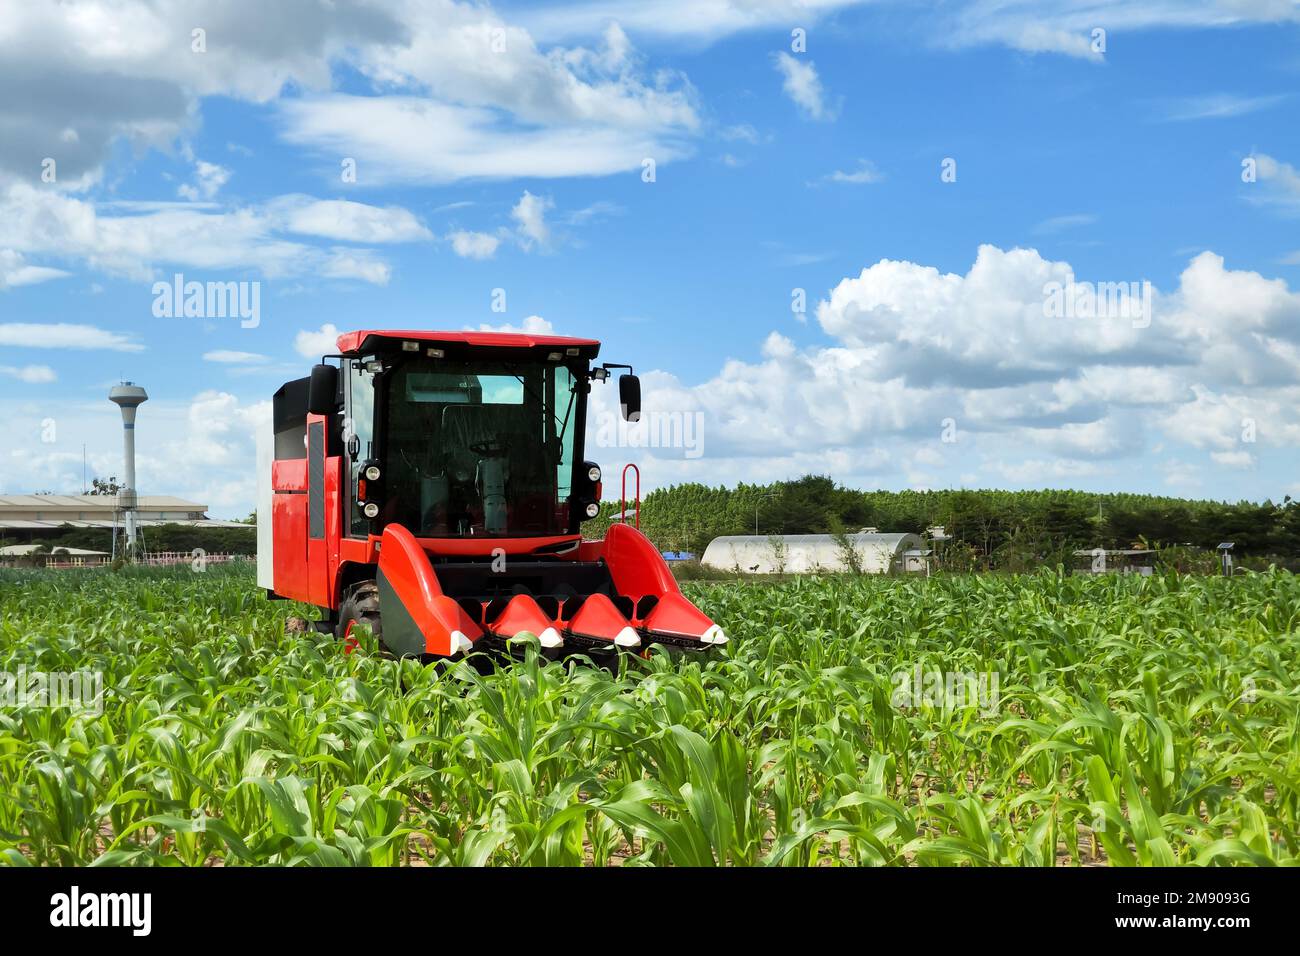 mini red corn combine harvester tractor with AI robot automatic control help to grow and harvesting of corn field at rural farming. New technology agr Stock Photo